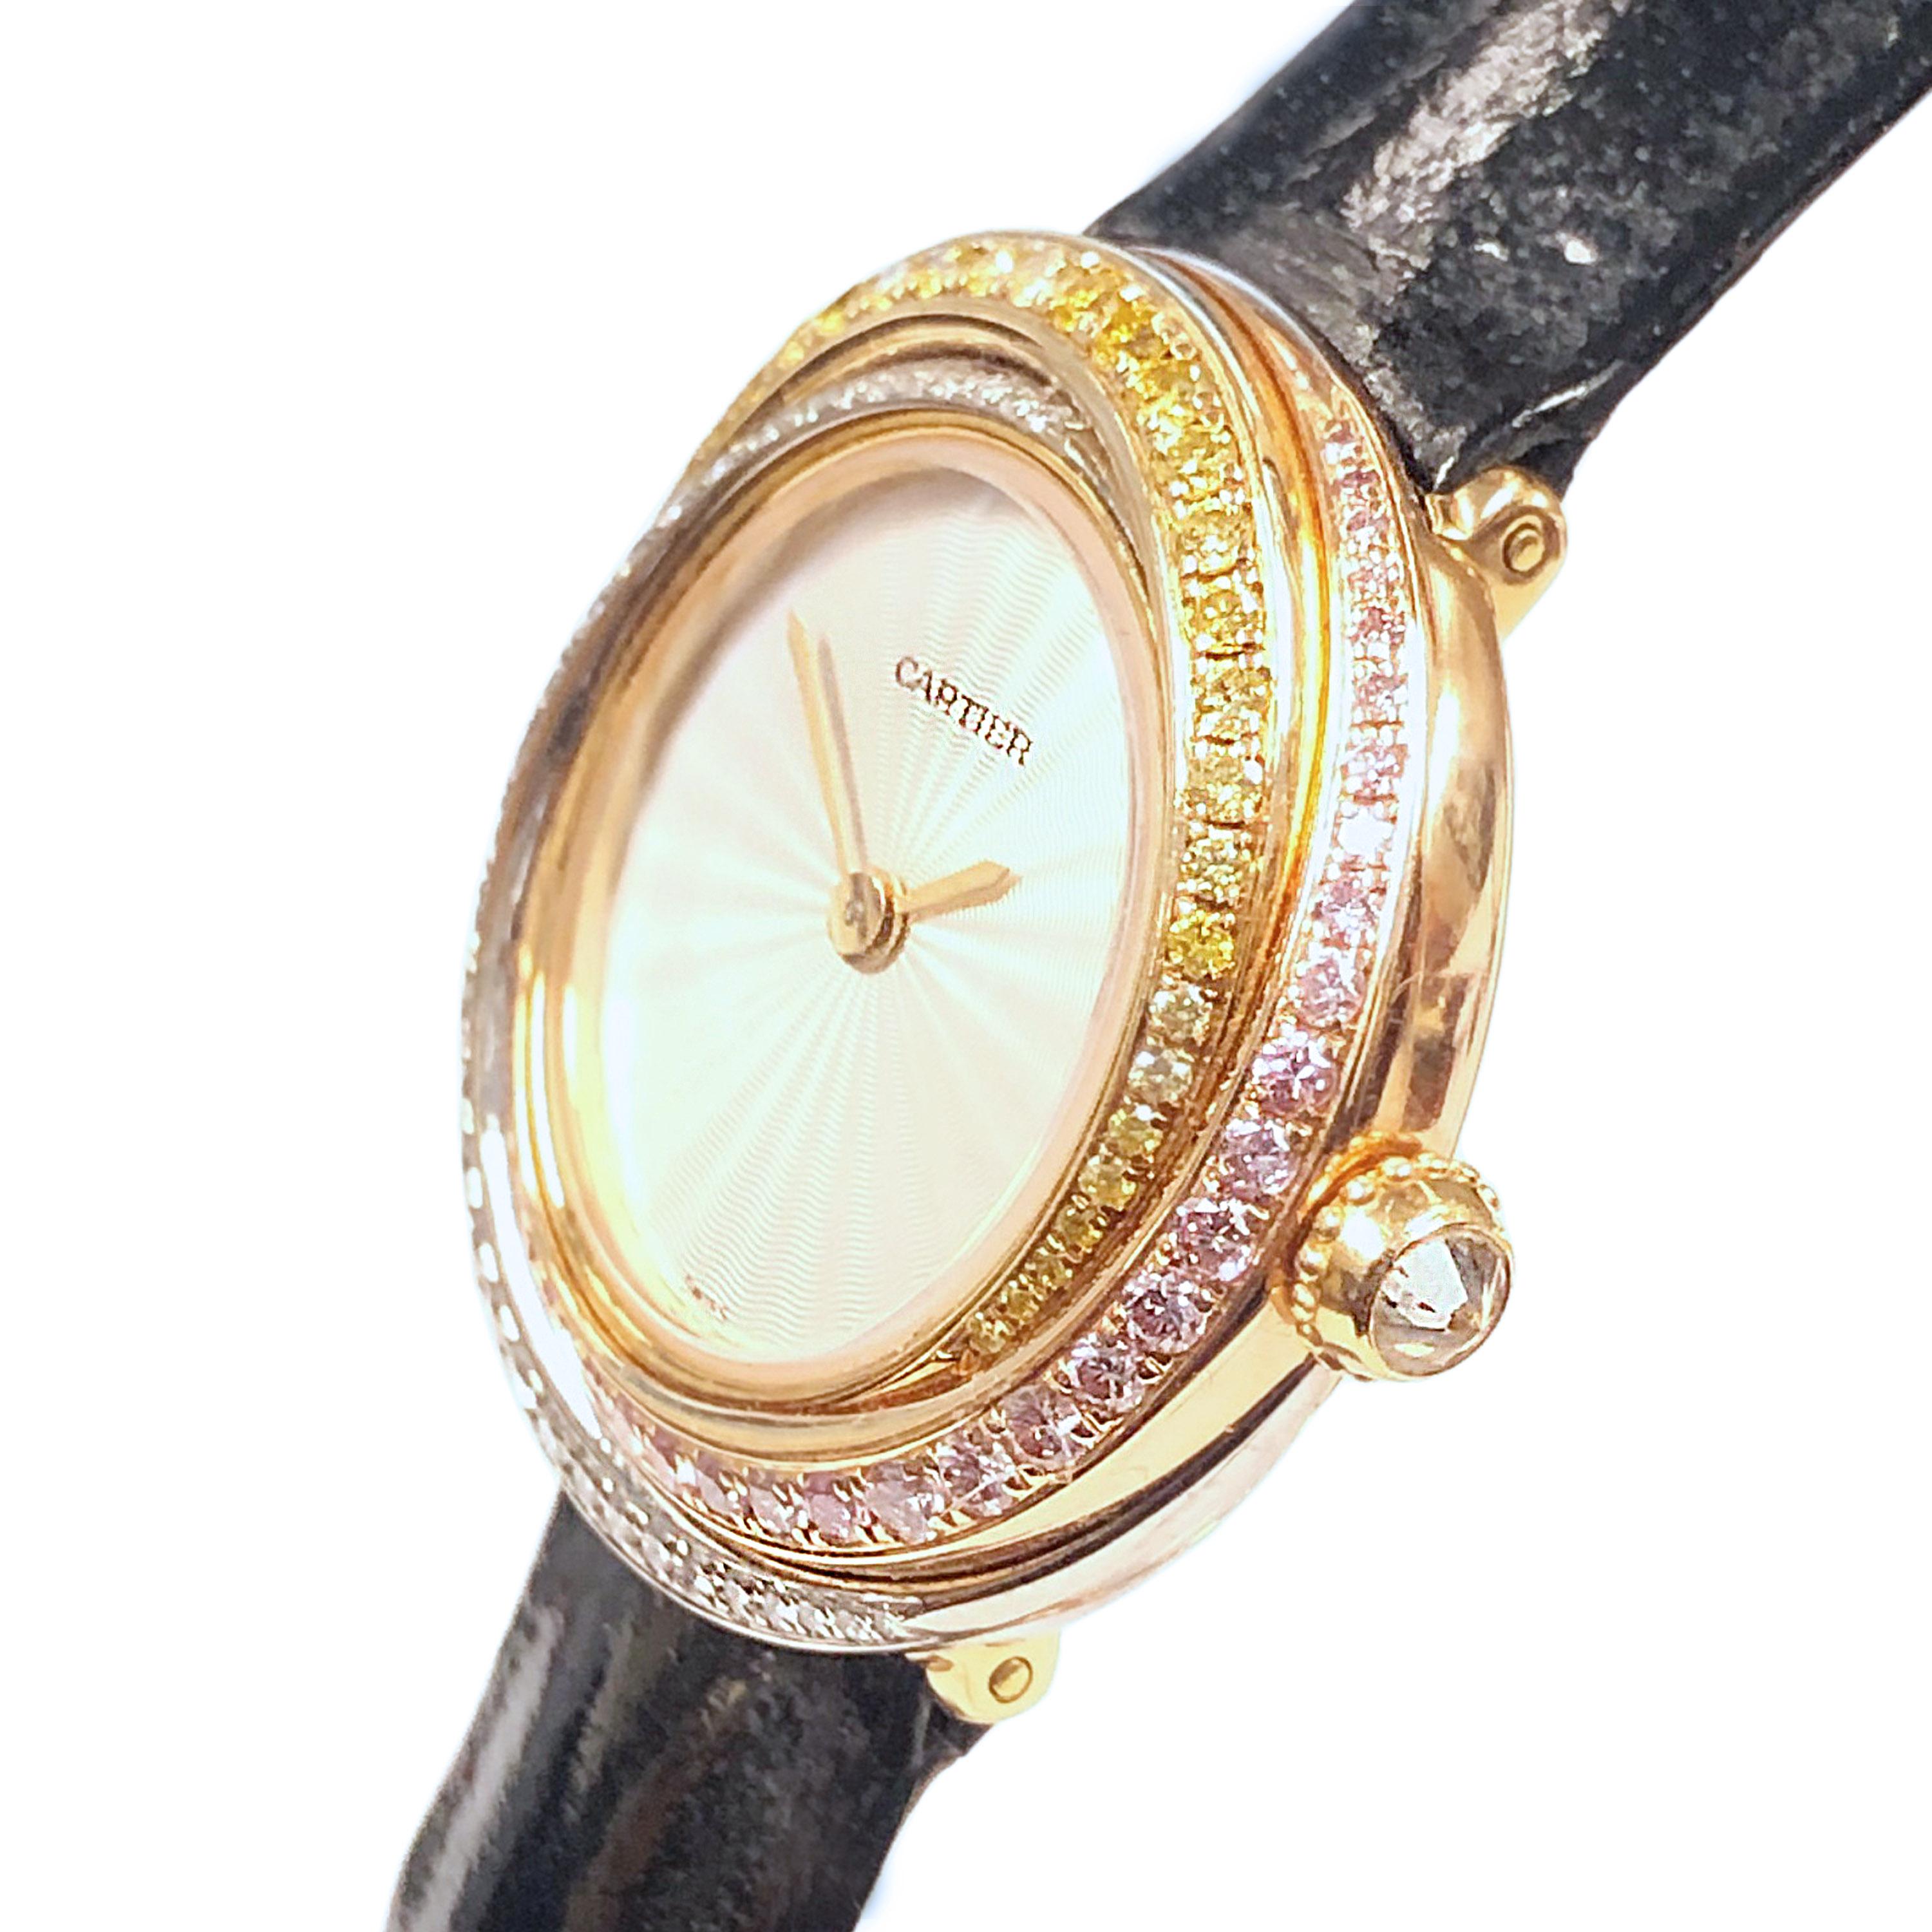 Circa 2010 Cartier Trinity collection Ladies Wrist watch, 27 MM 18K White, Yellow and Rose Gold Water resistant Case, Diamond set Crown.  Set with White and Natural Fancy Color Pink and Yellow Diamonds. Quartz Movement, Silver satin, Guilloche,